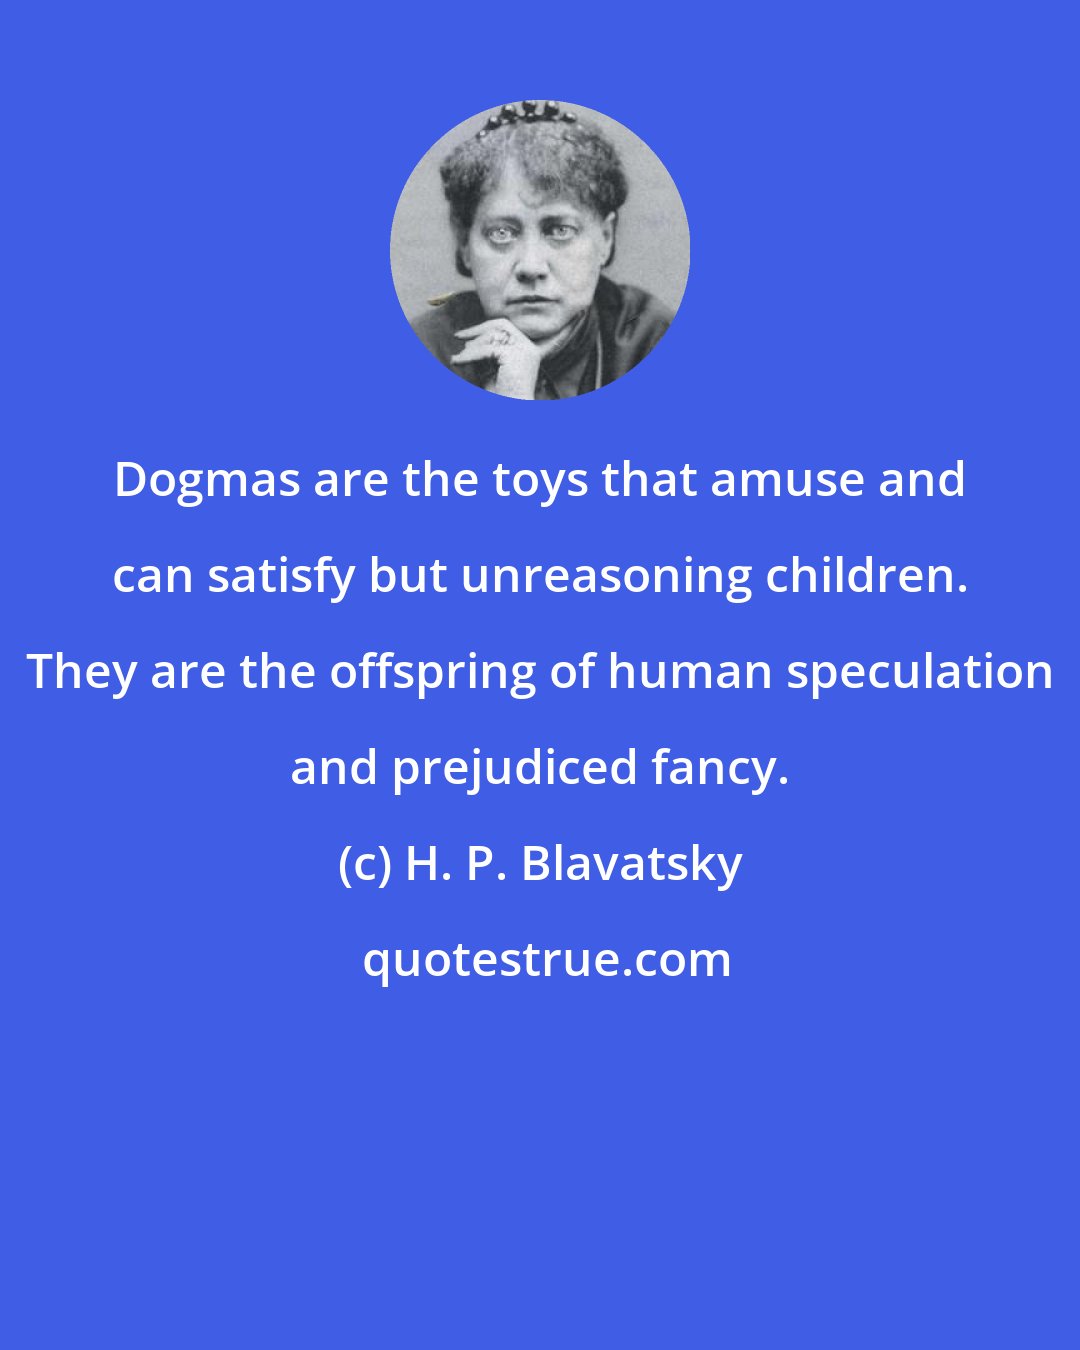 H. P. Blavatsky: Dogmas are the toys that amuse and can satisfy but unreasoning children. They are the offspring of human speculation and prejudiced fancy.